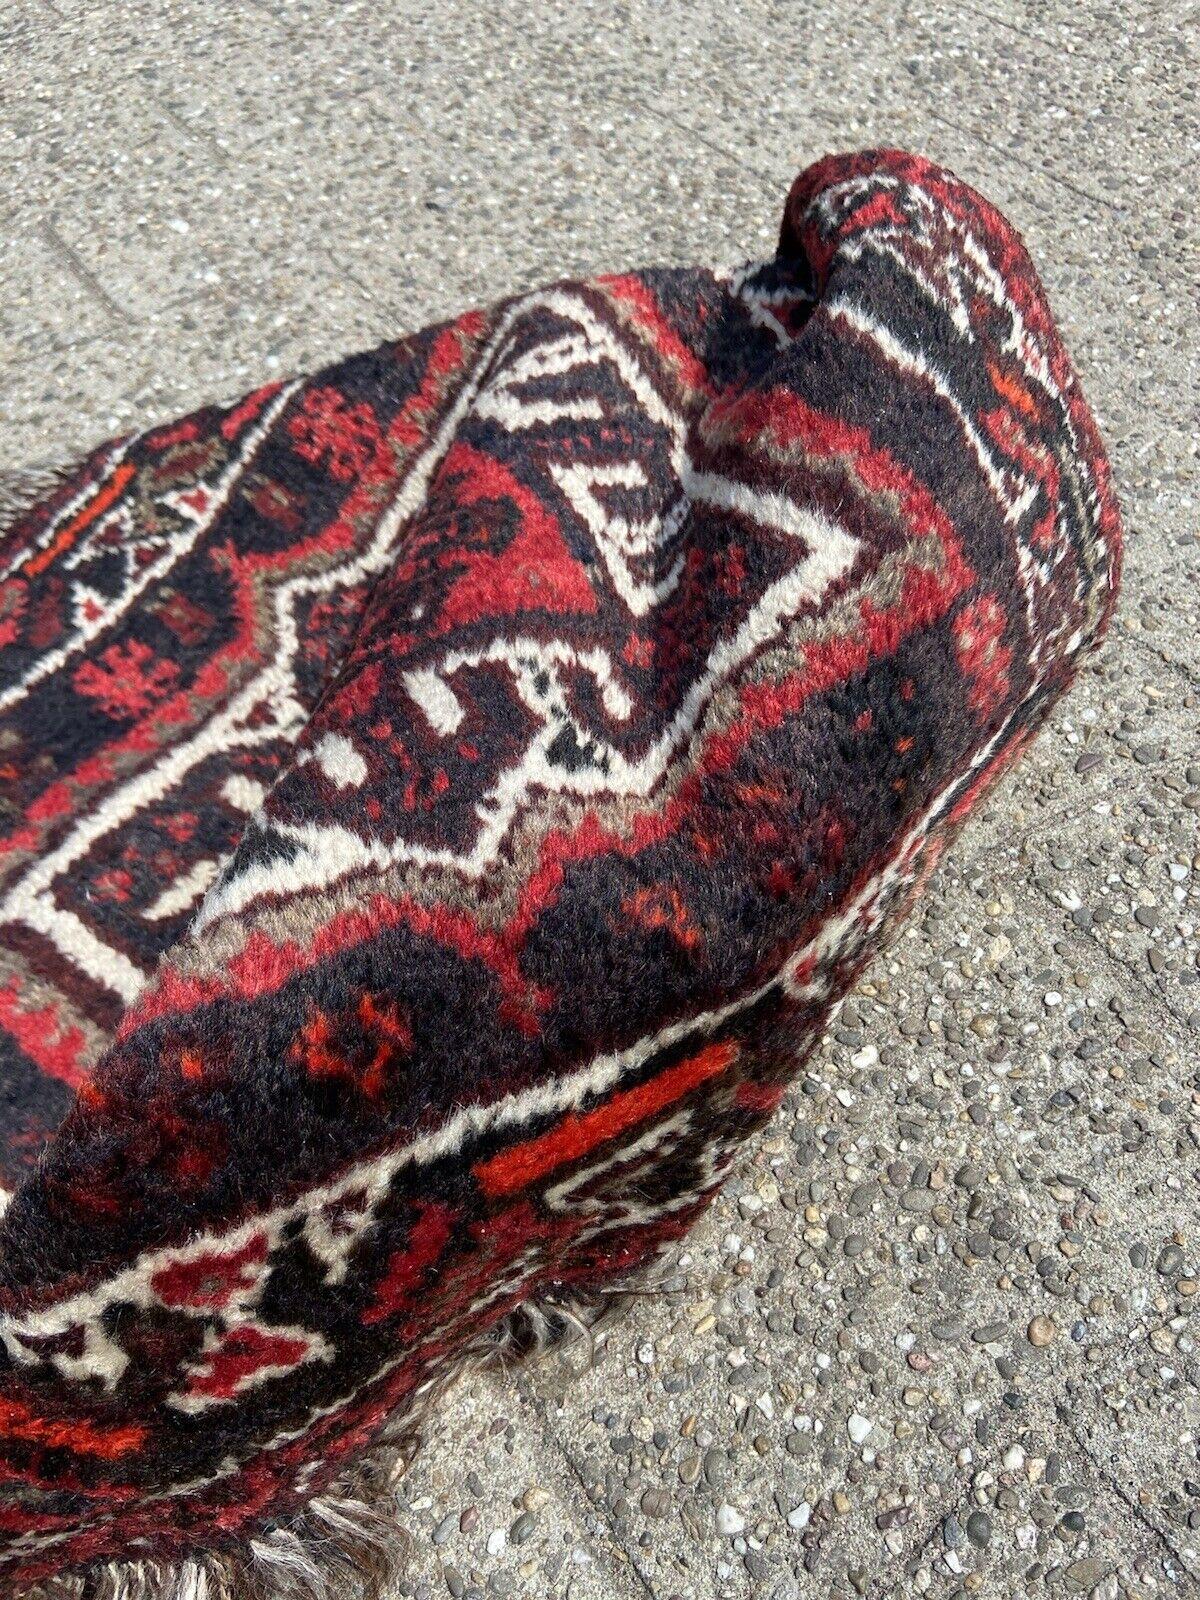 Mid-20th Century Handmade Vintage Afghan Baluch Collectible Bagface 2.1' x 2.2', 1950s - 1S22 For Sale